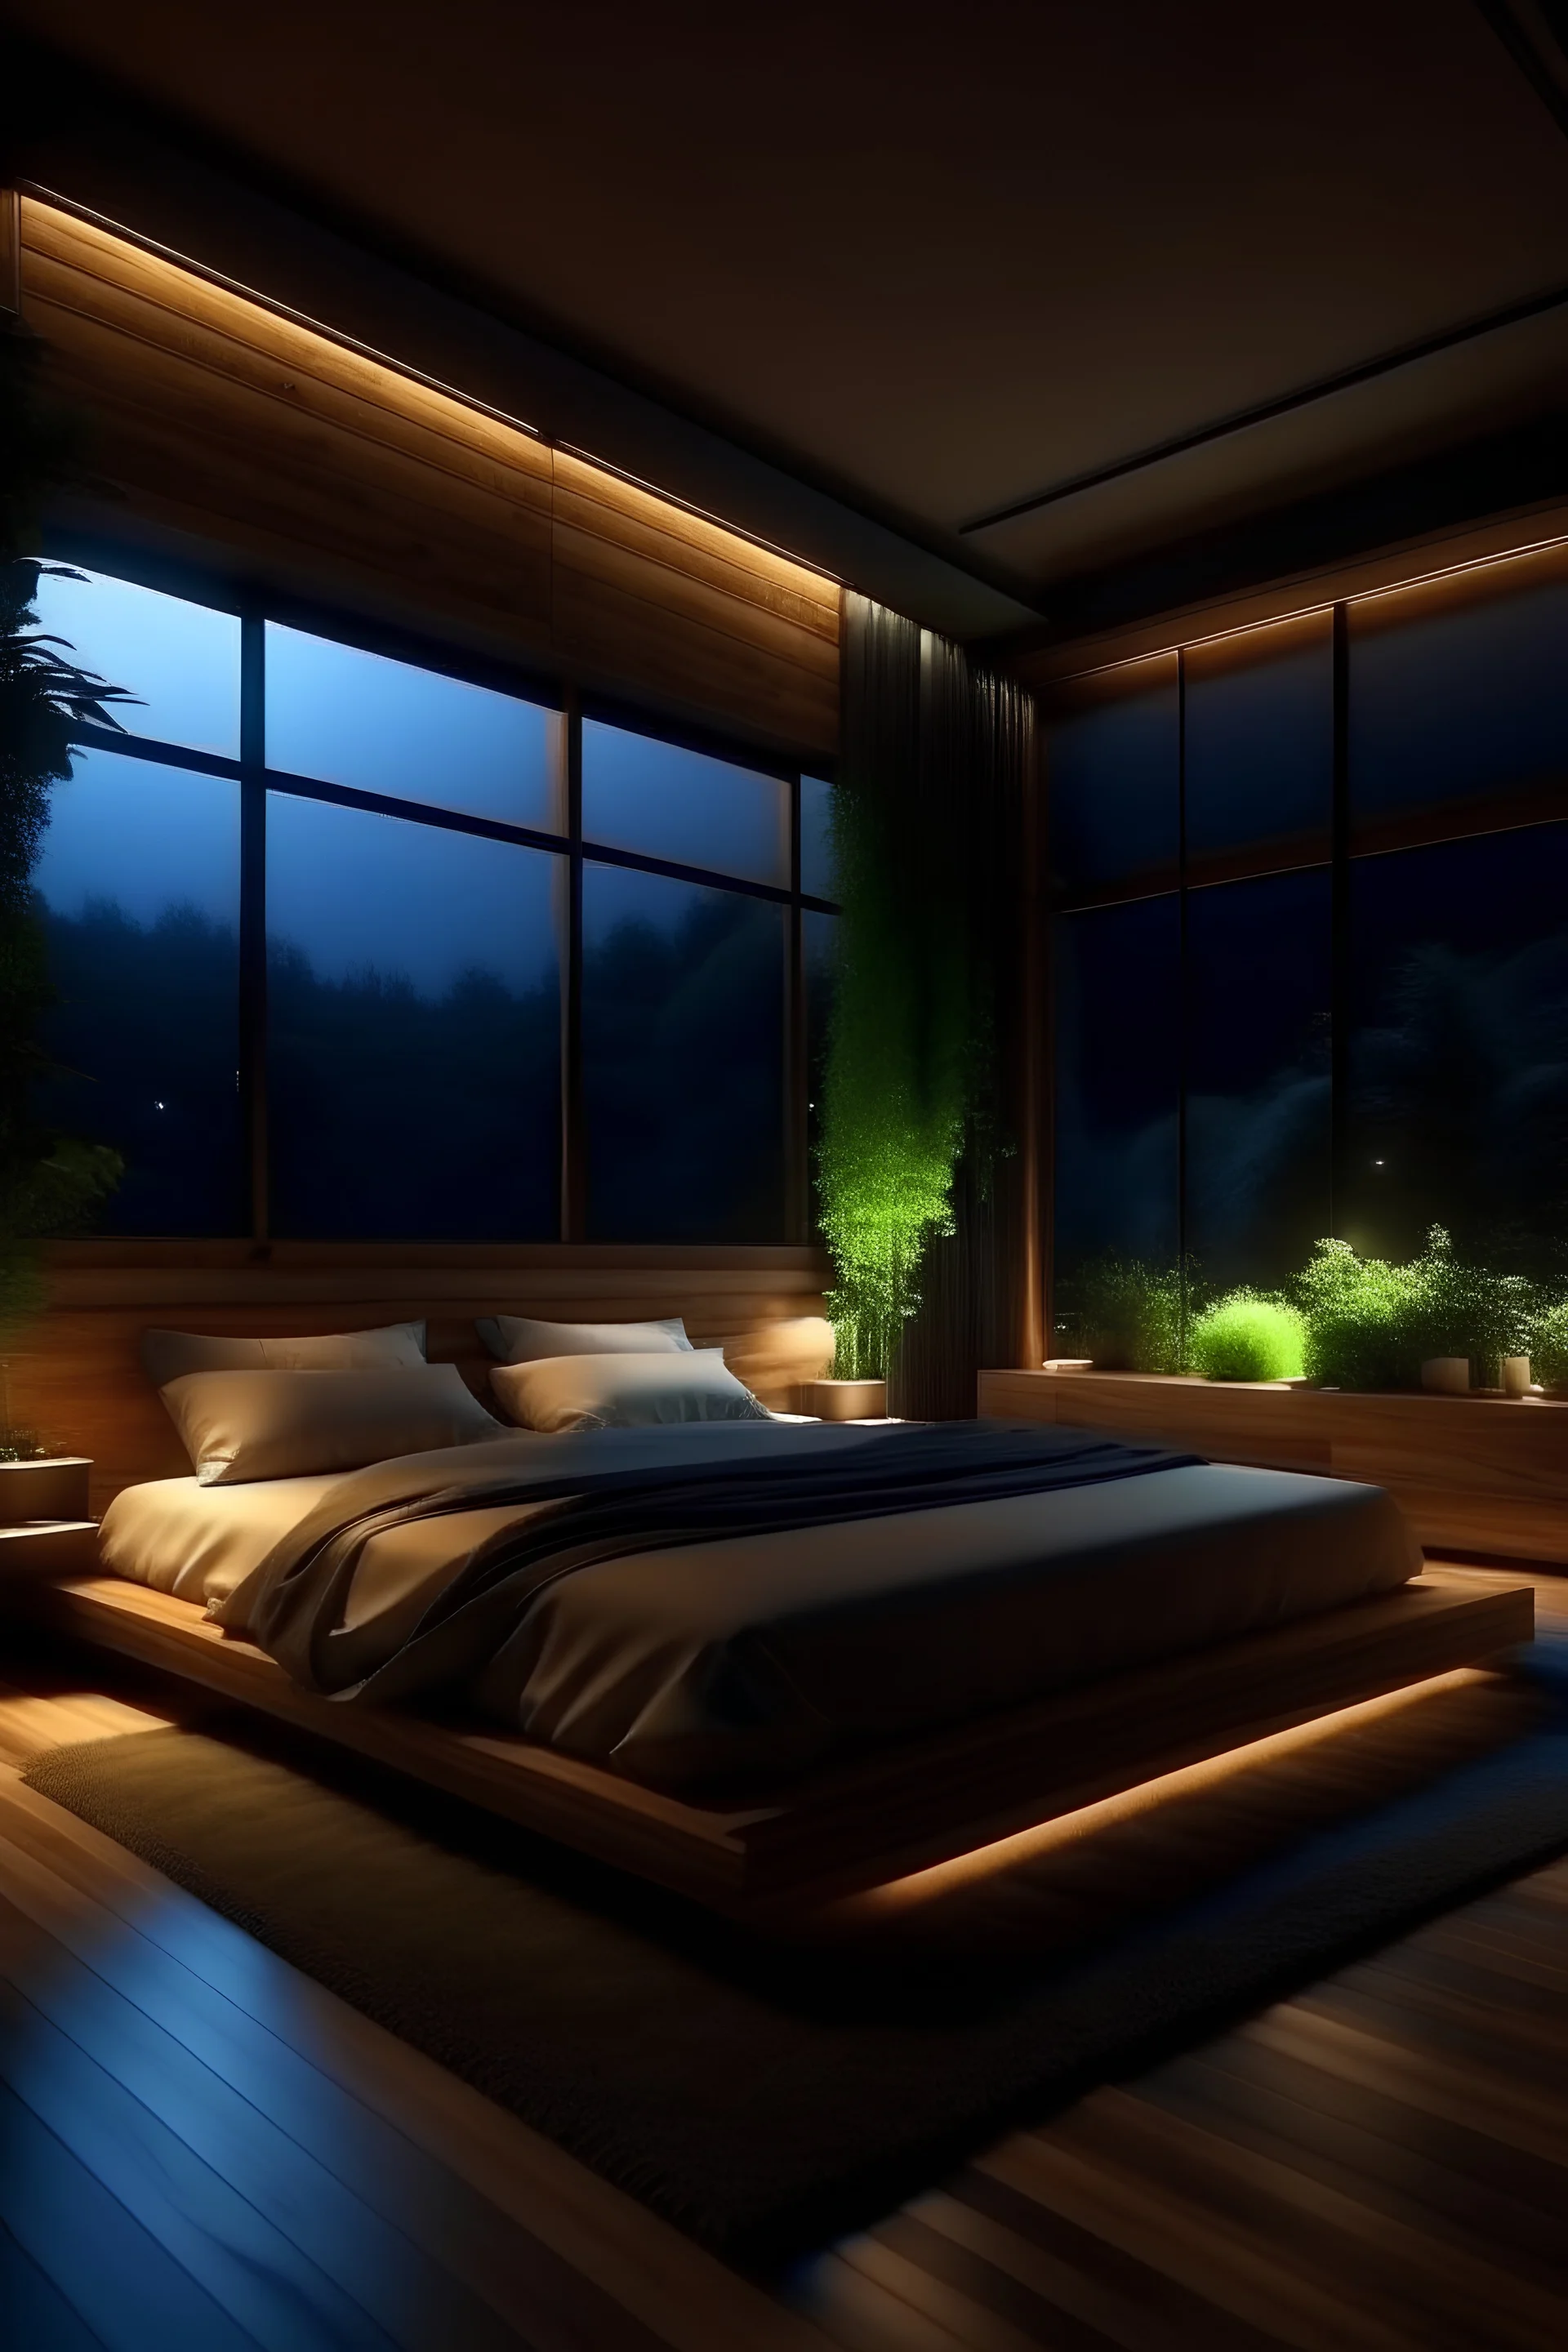 Generate big bedroom at night, with big windows, made out of wood, night tables, a big bed and vegetation.